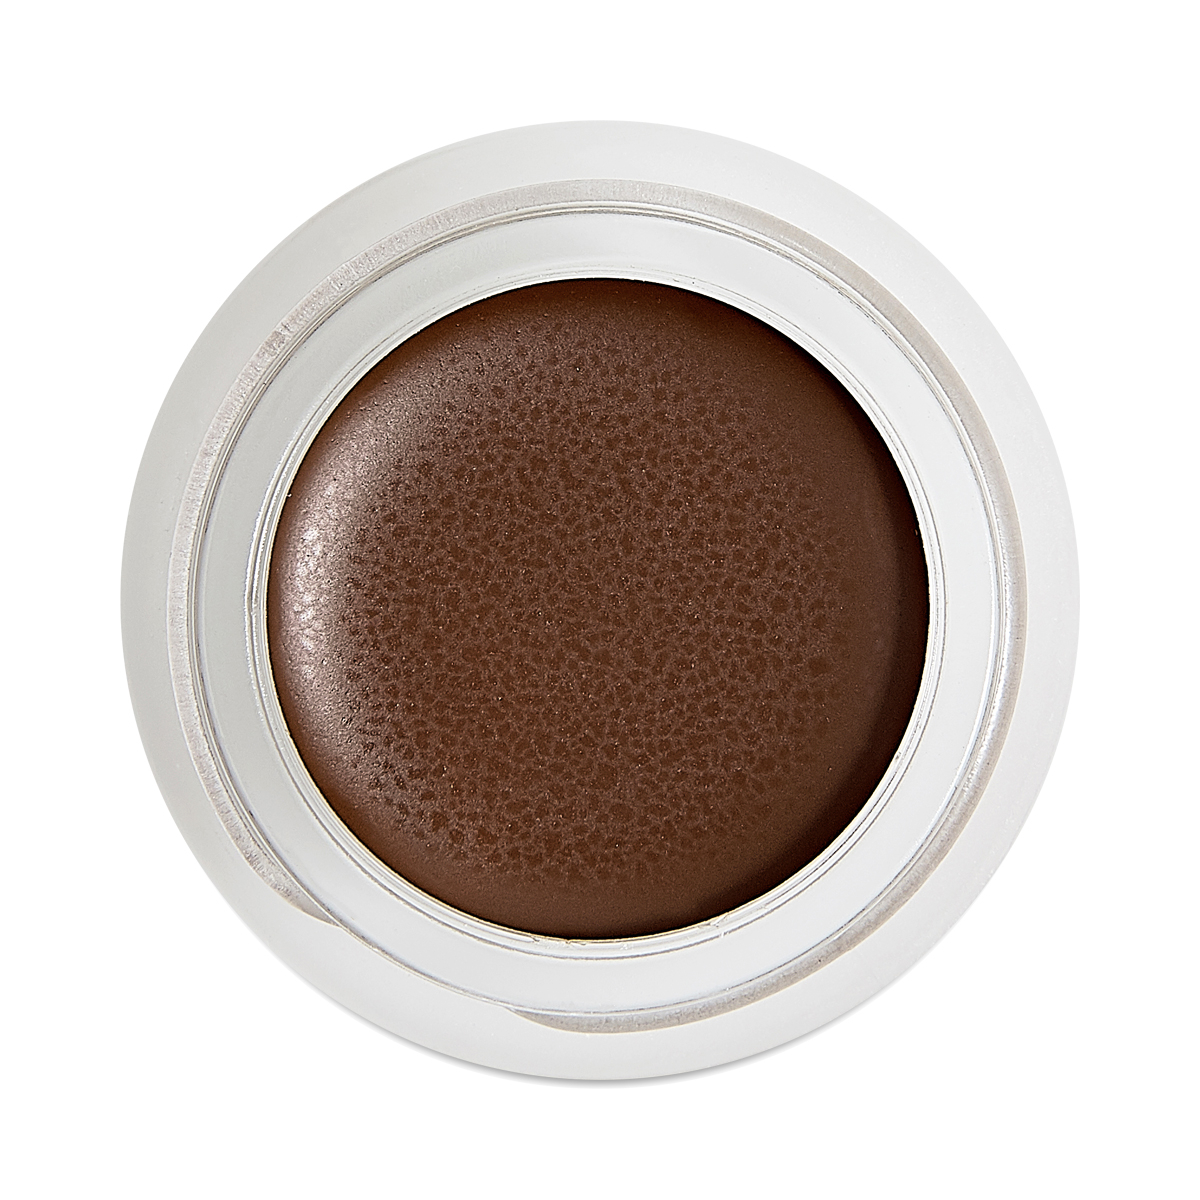 RMS Beauty Un Cover-Up Concealer, Shade 122 0.2 oz jar